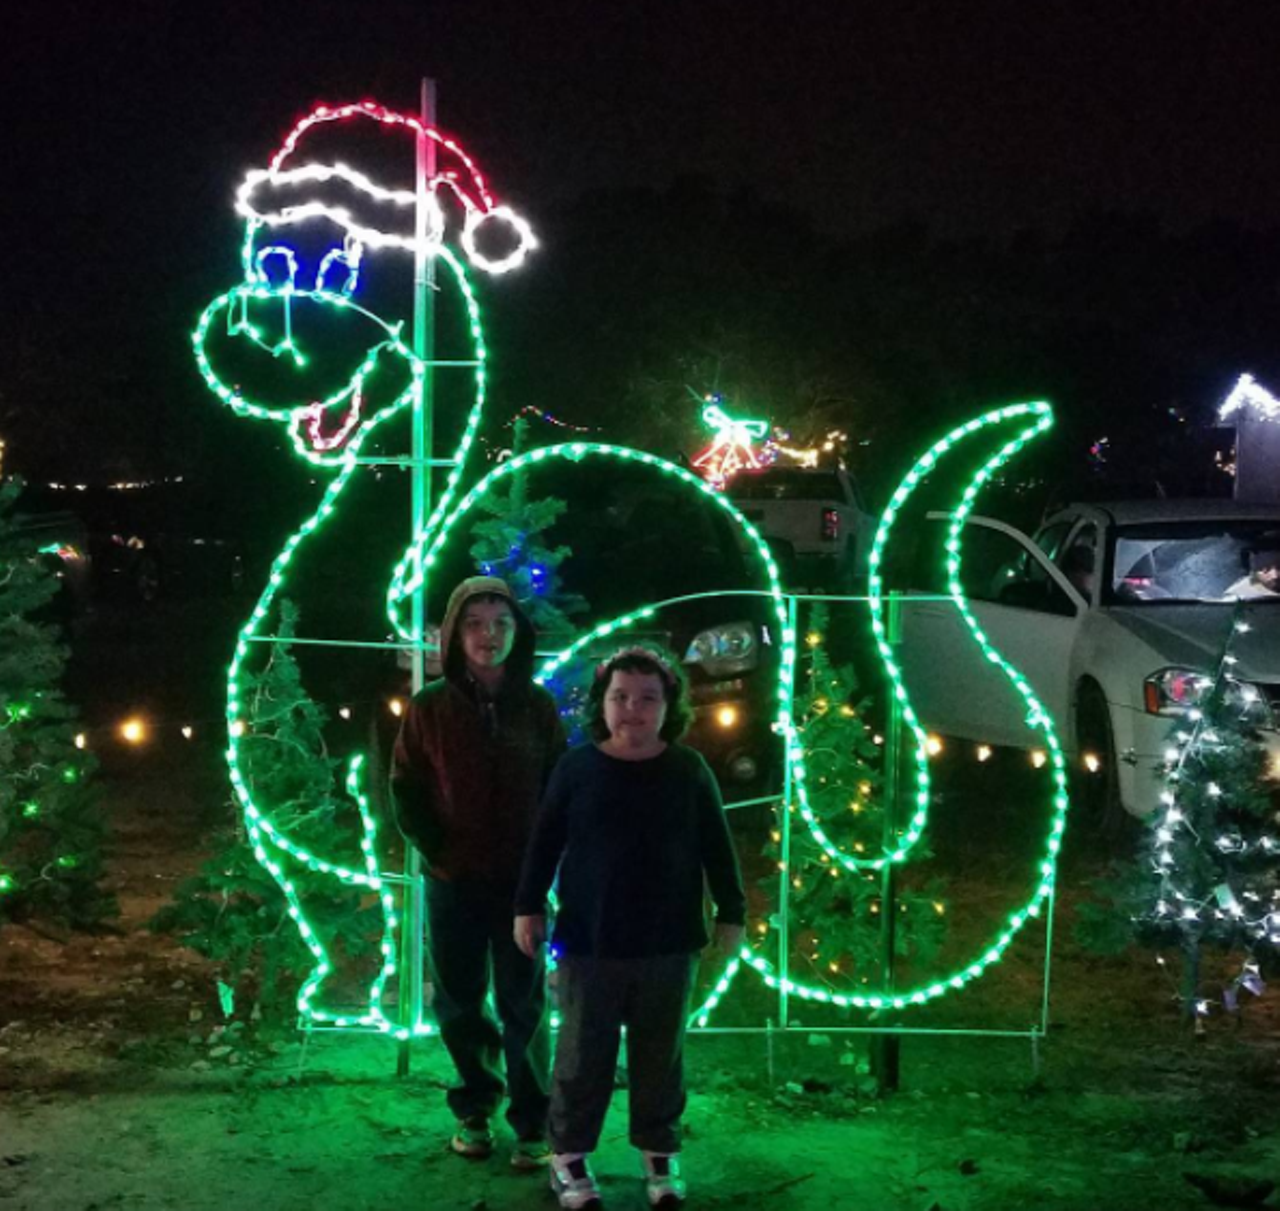 Elf Acres
1475 Grosenbacher Road, (210) 643-8662,  facebook.com/elfacres
Head out to the 20-acre Christmas light drive-thru and strike a pose with your favorite installations.
Photo via Instagram,  kennethkirk1919